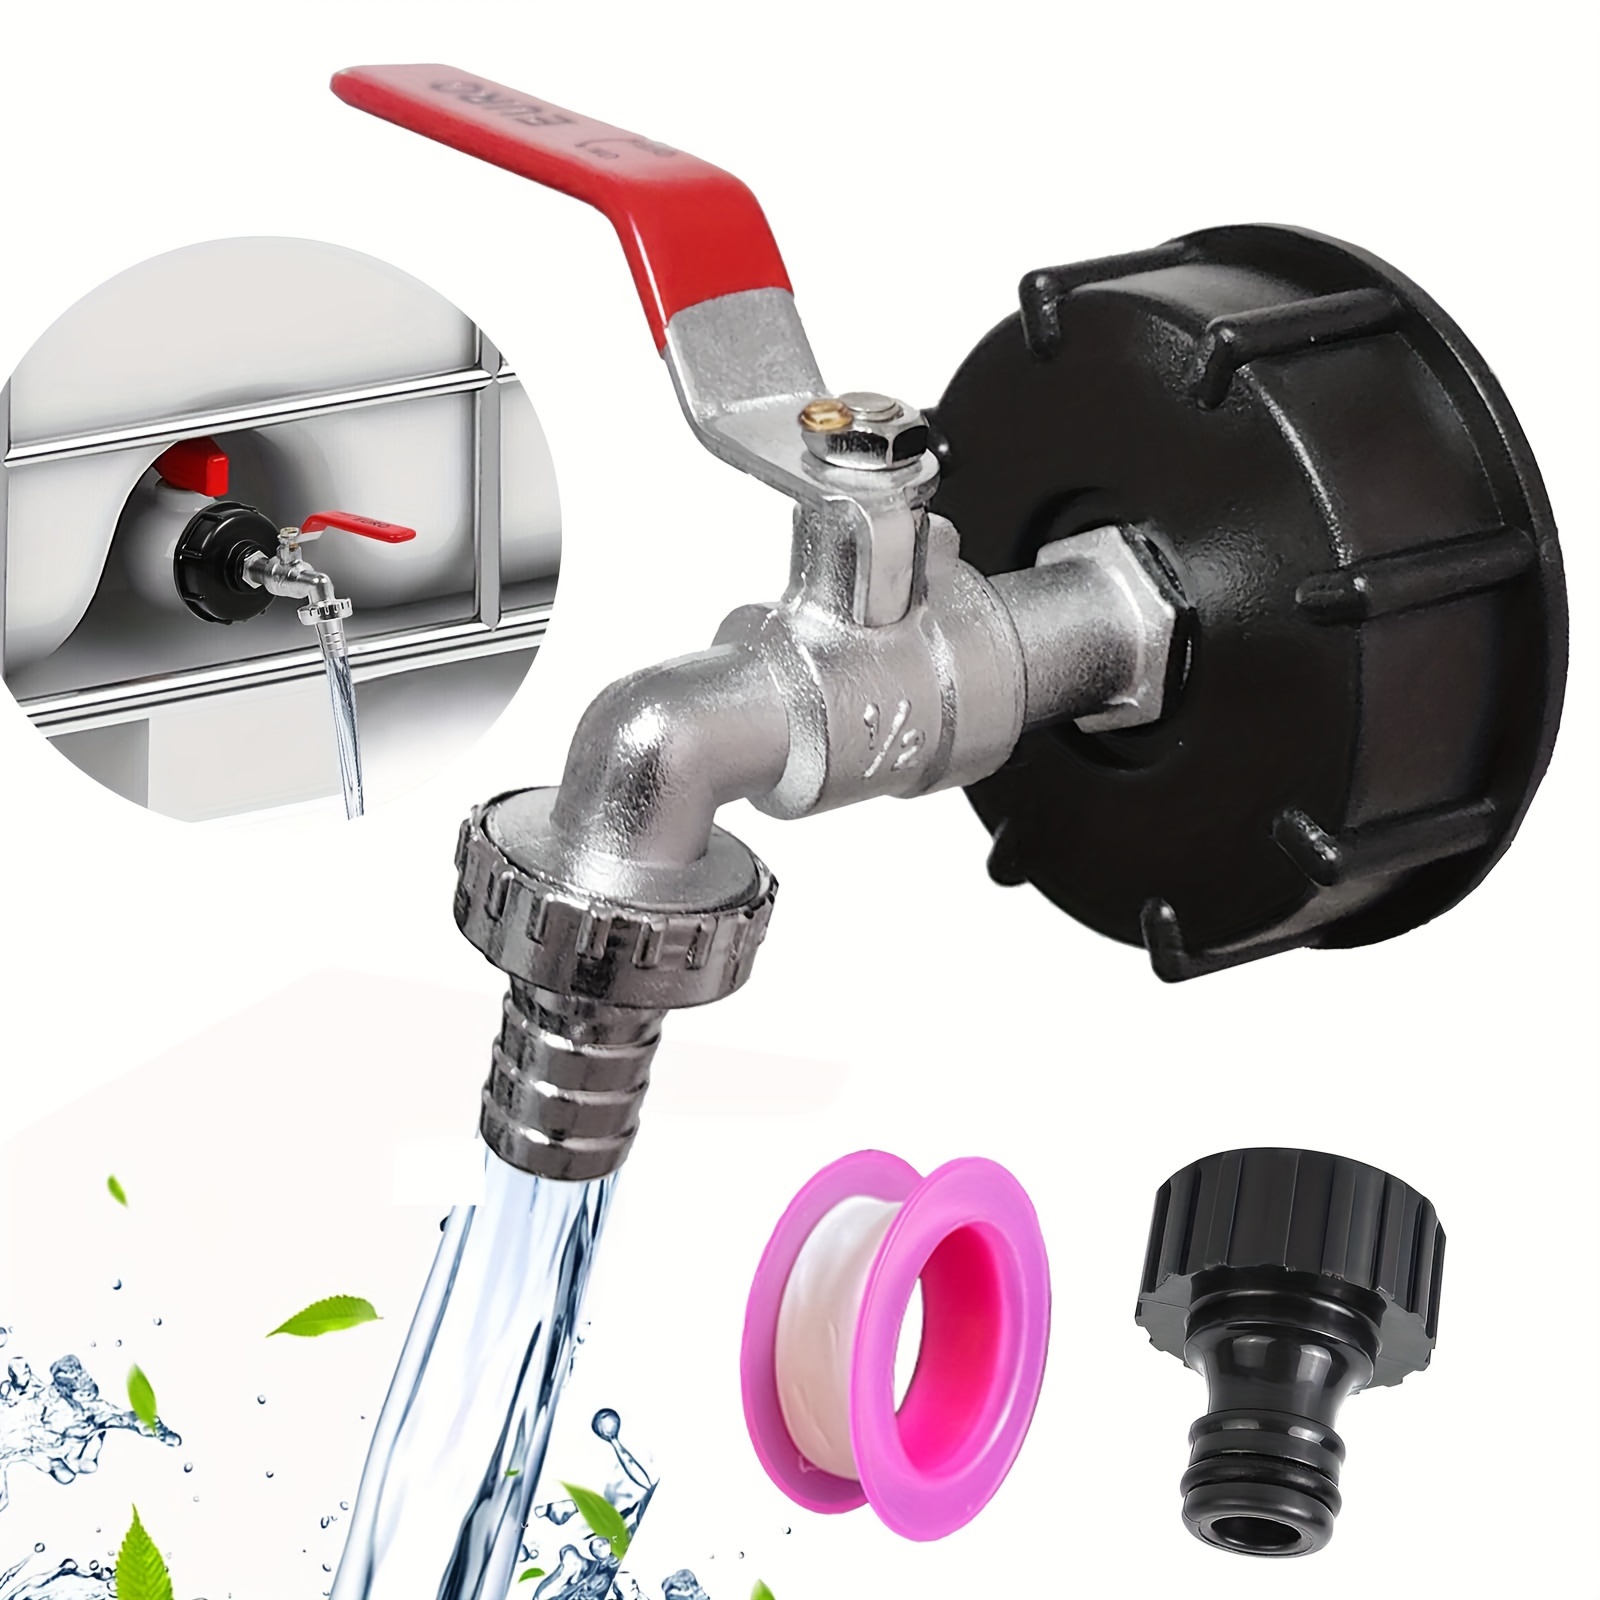 

1000l Ibc Water Tank Outlet Tap - Durable Alloy Ball Valve With 1/2" Adapter, Fit For Rainwater & Garden Tanks